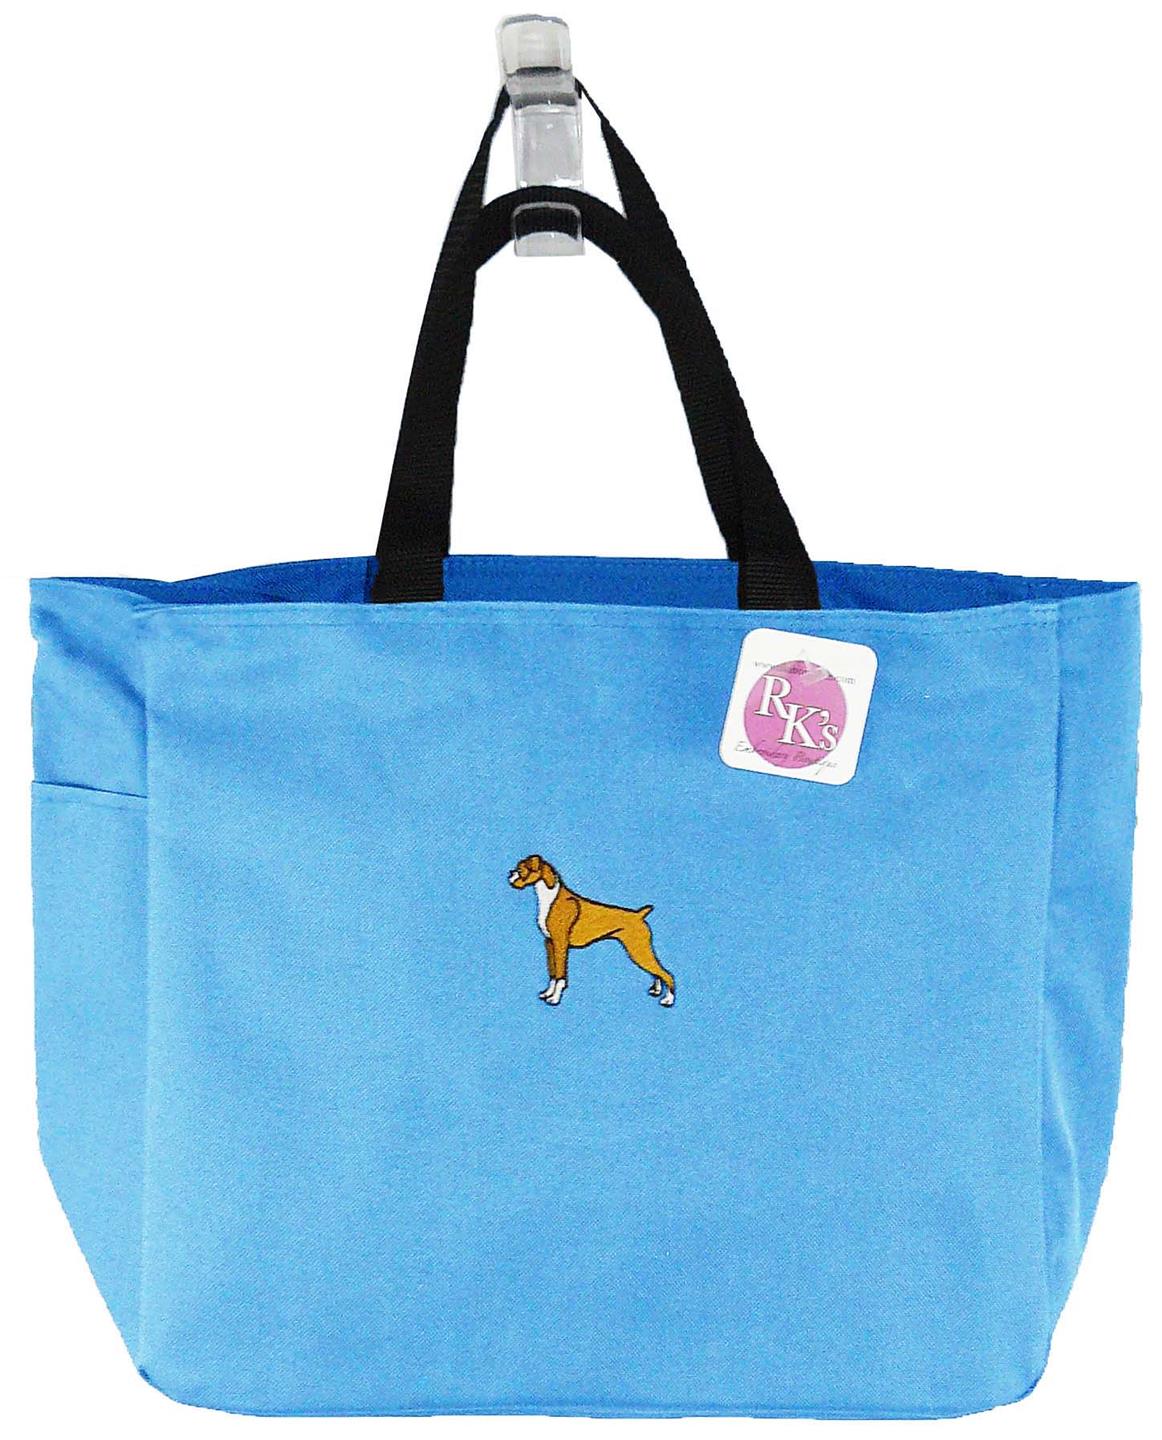 Boxer Tote Essential Bag Puppy Dog Best in Show Breed Monogram Custom Embroidery | eBay